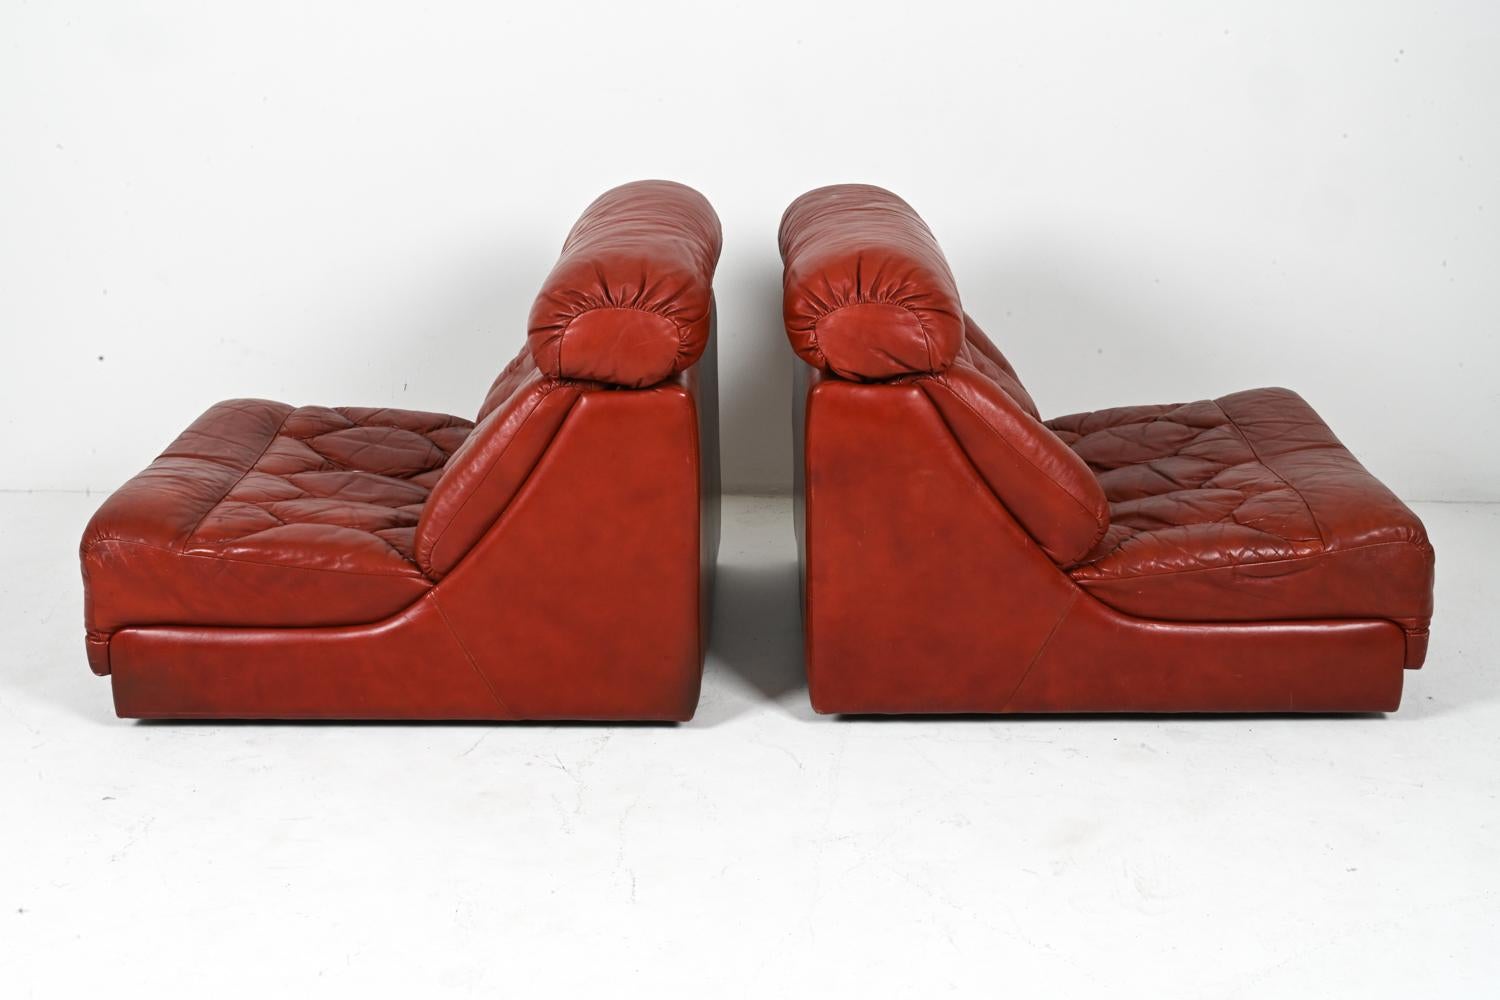 Pair of British Space Age Modular Leather Lounge Chairs by Tetrad For Sale 6